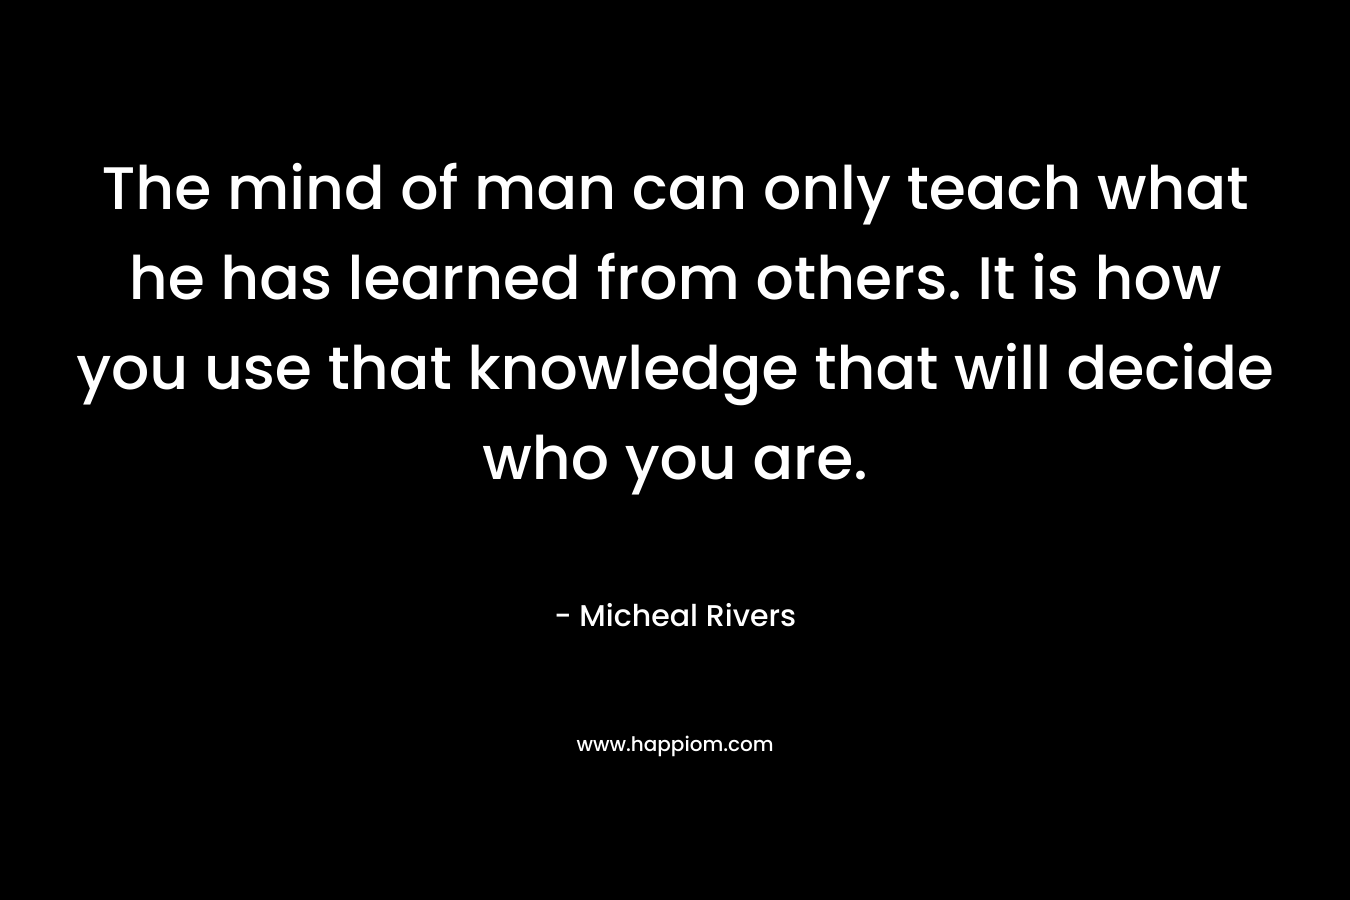 The mind of man can only teach what he has learned from others. It is how you use that knowledge that will decide who you are. – Micheal Rivers